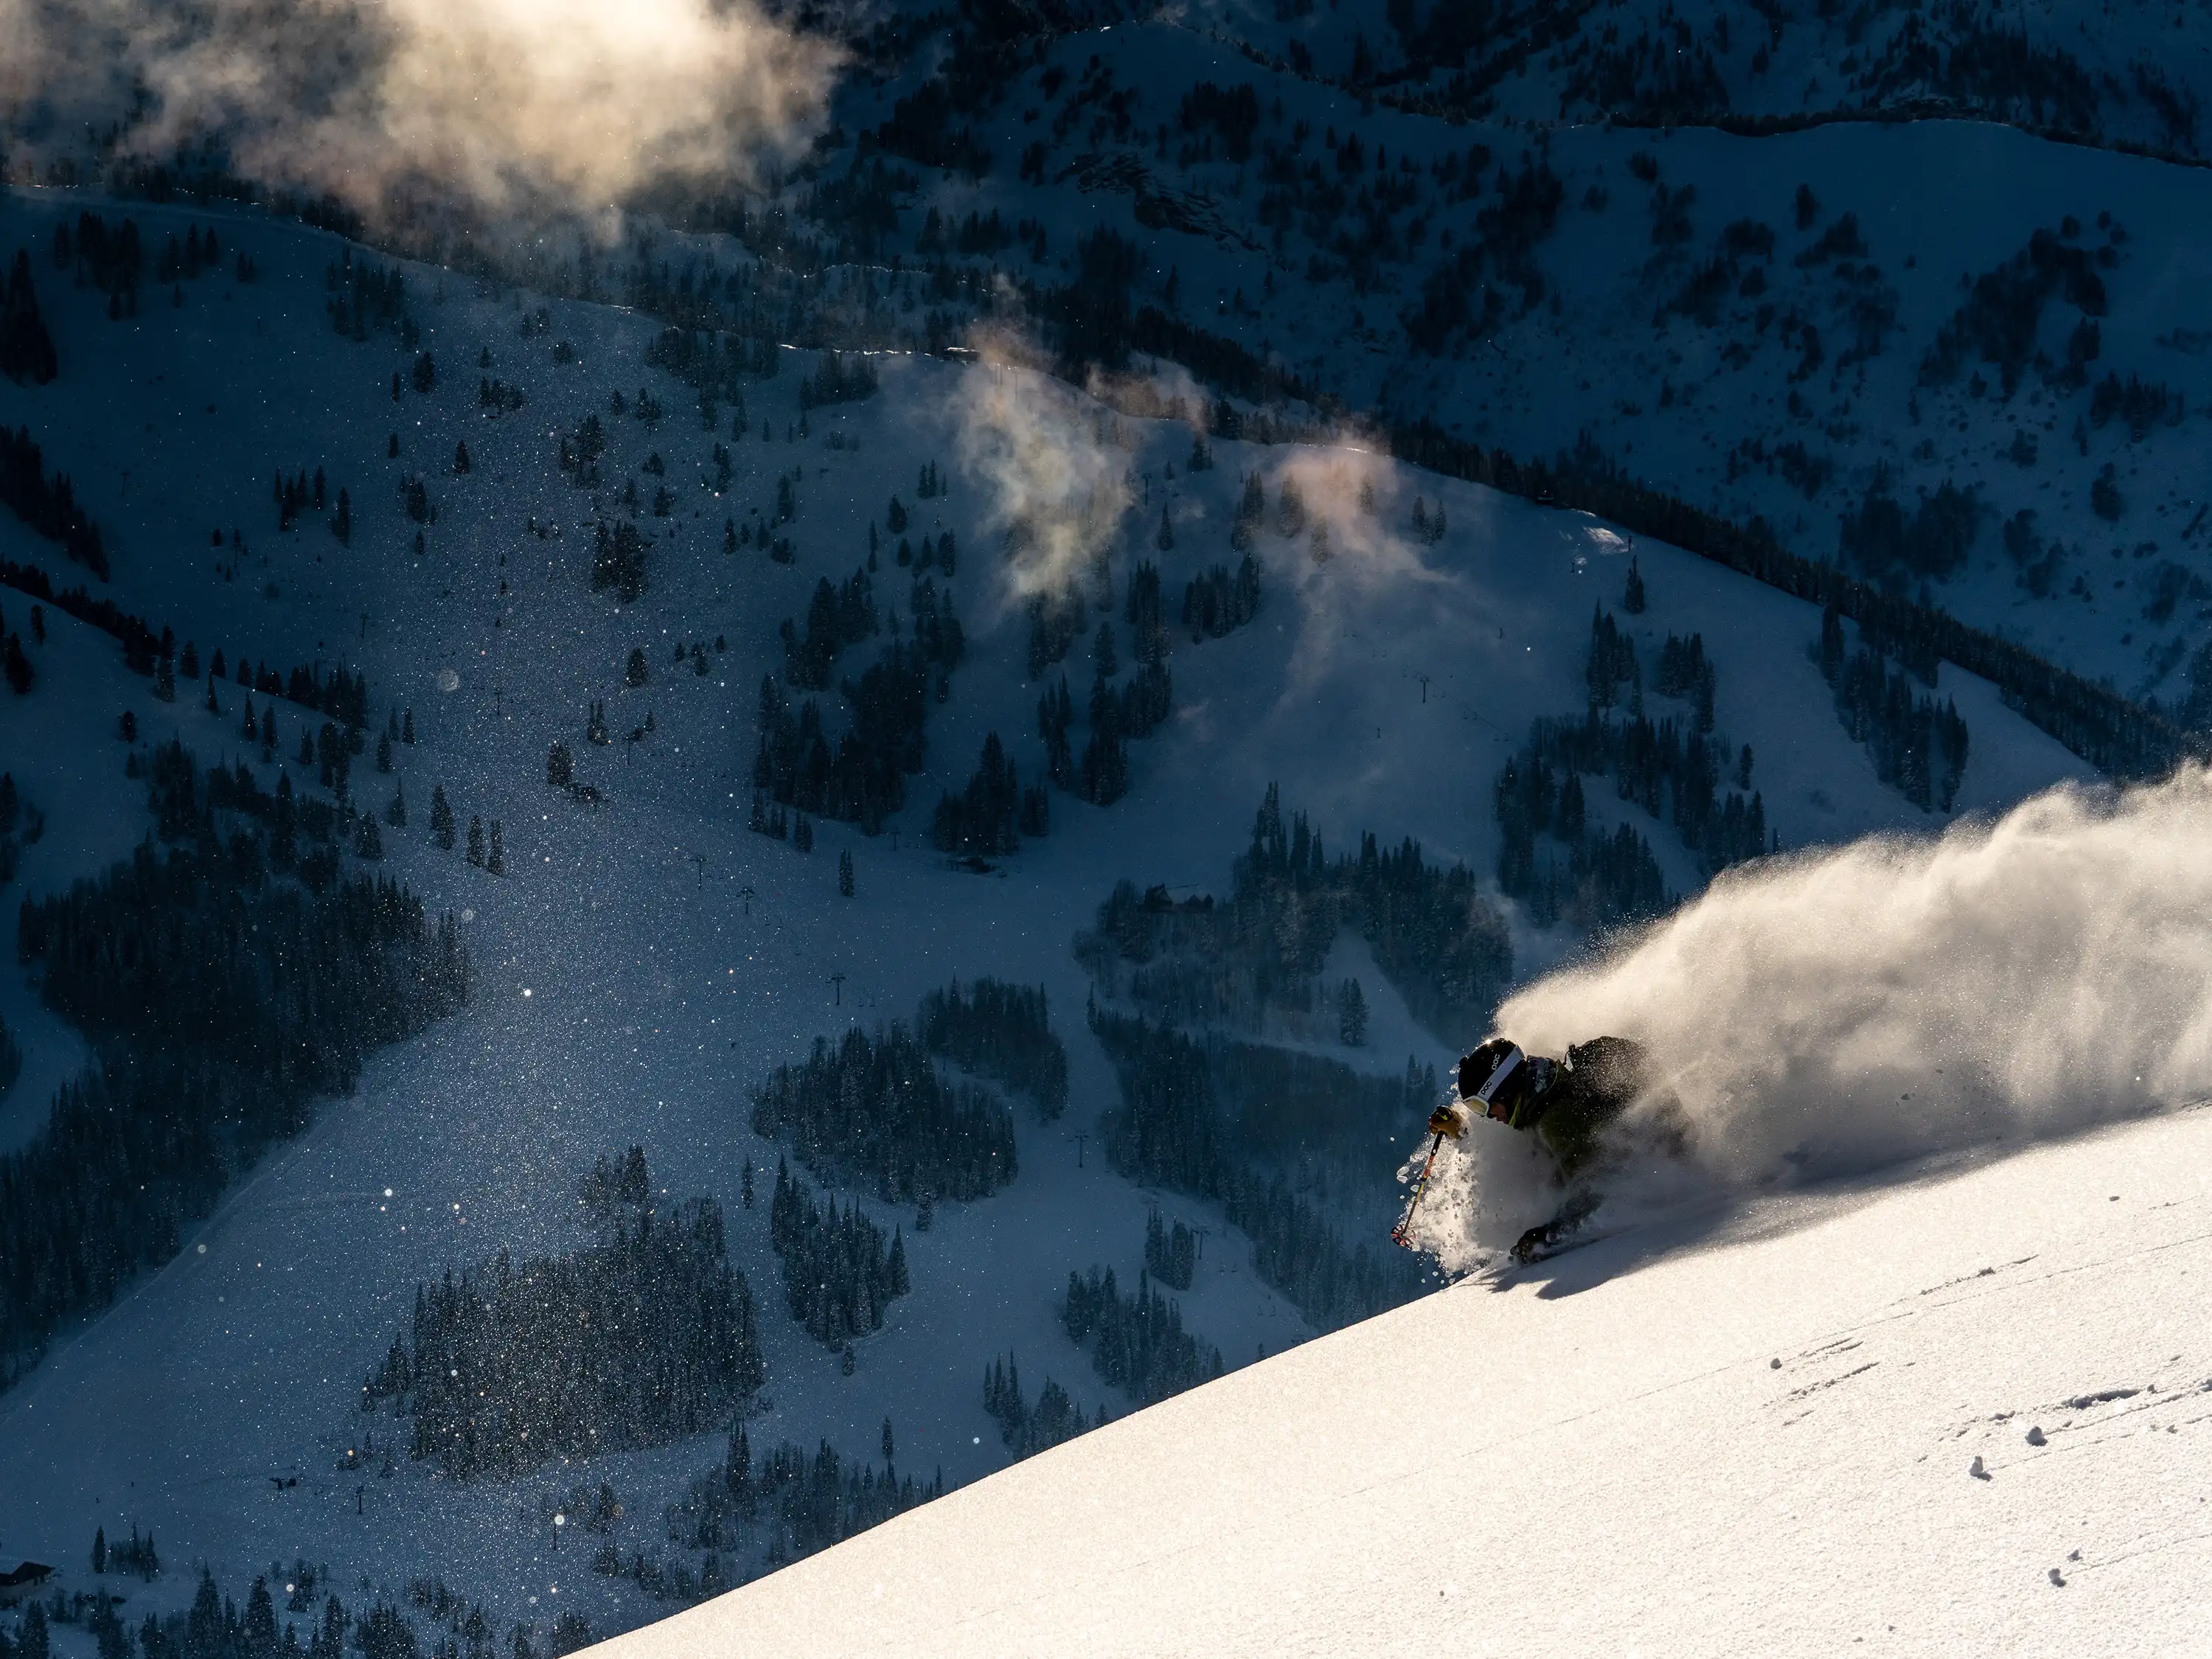 Wasatch Skiing by Cam McLeod